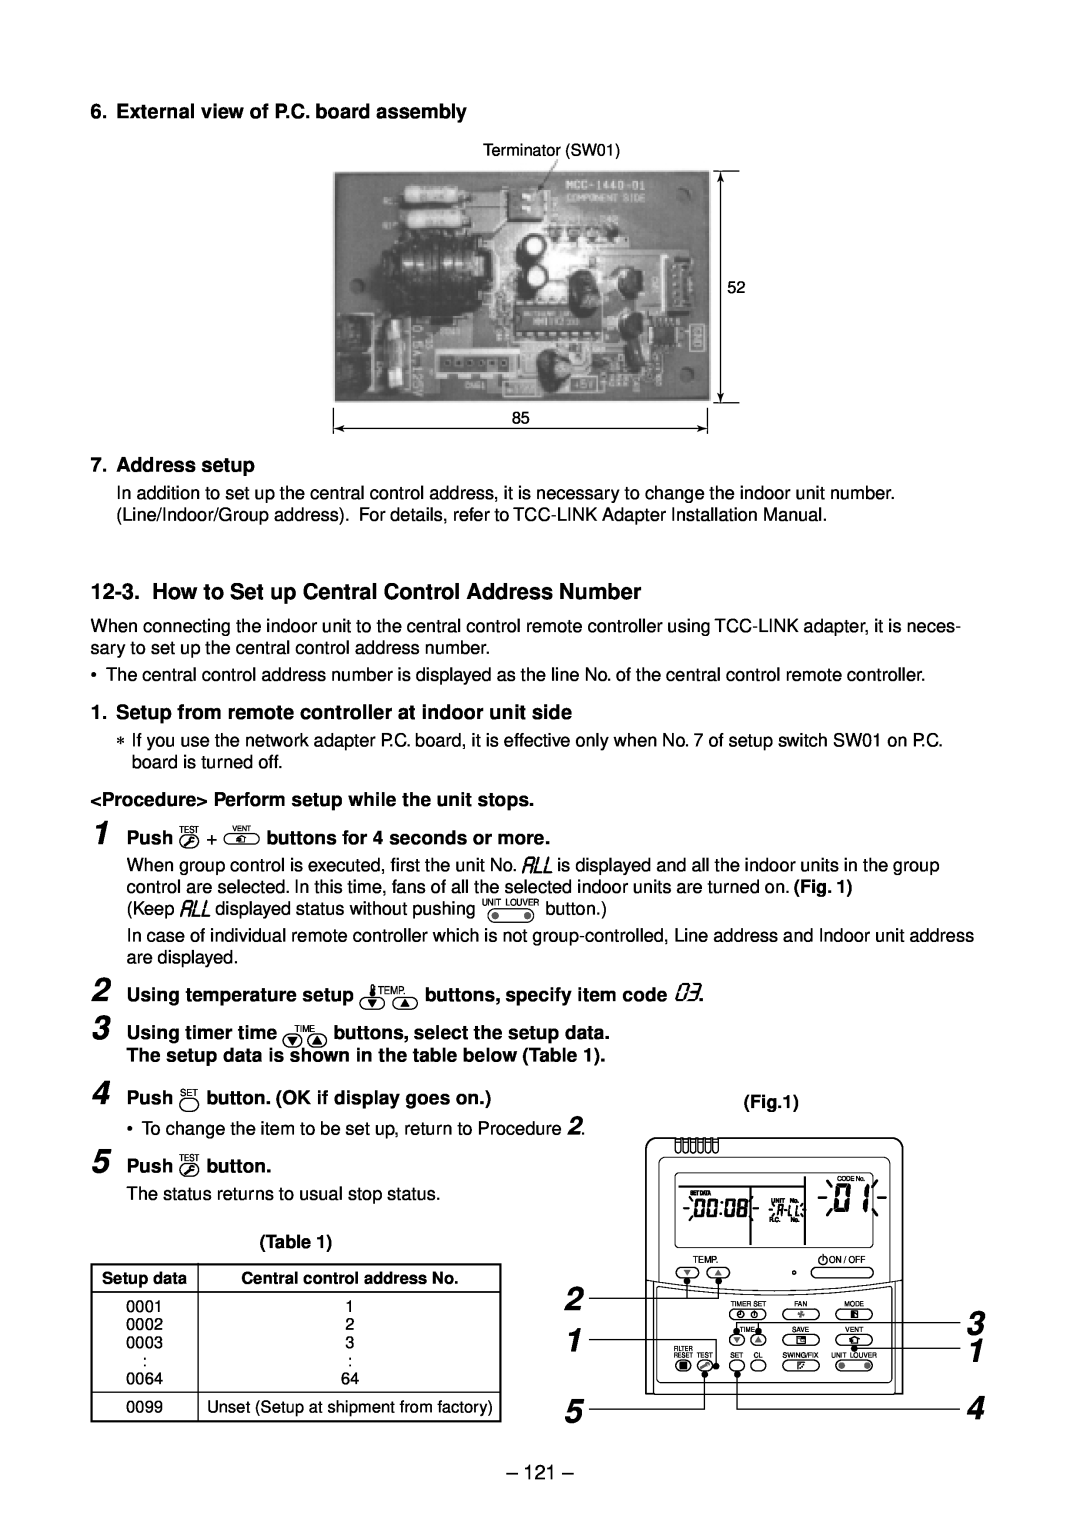 Toshiba RAV-SP404AT-E How to Set up Central Control Address Number, External view of P.C. board assembly, Address setup 